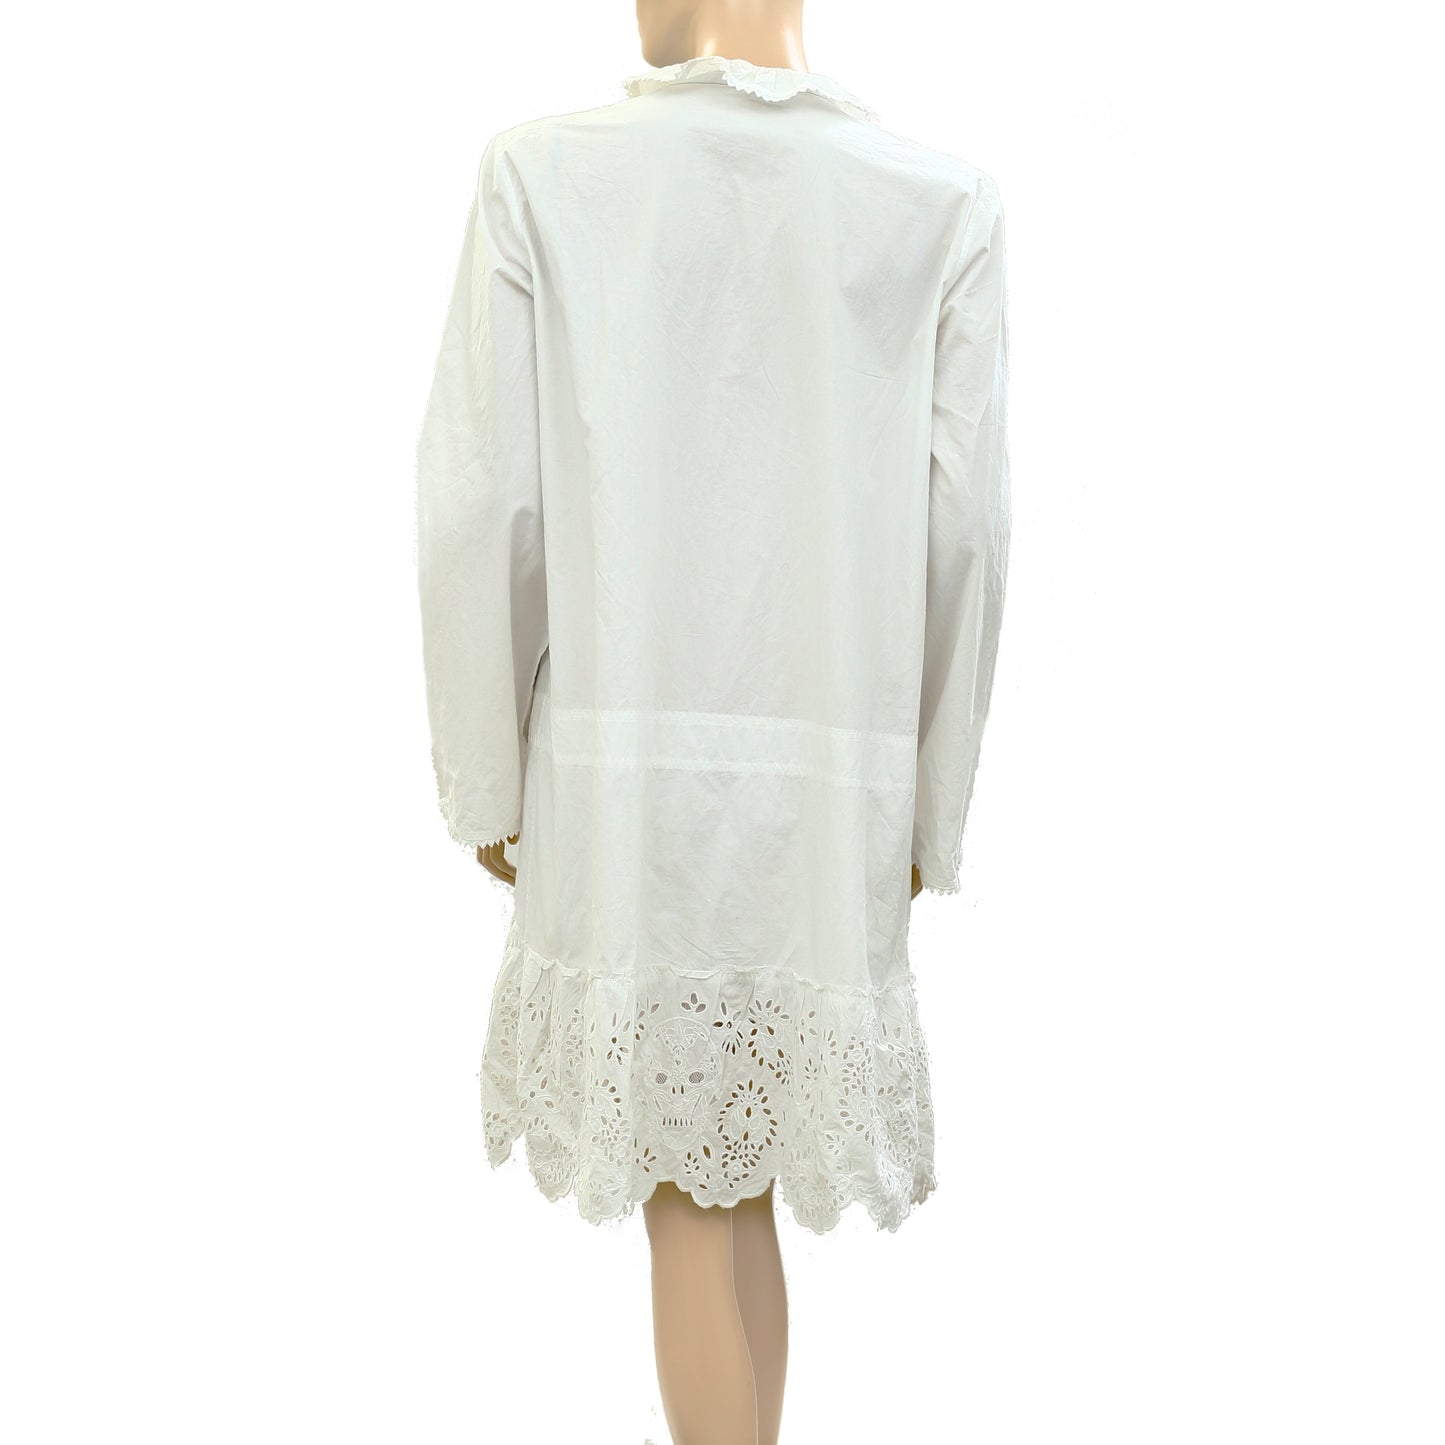 Zadig & Voltaire Eyelet Embroidered Tunic Mini Dress